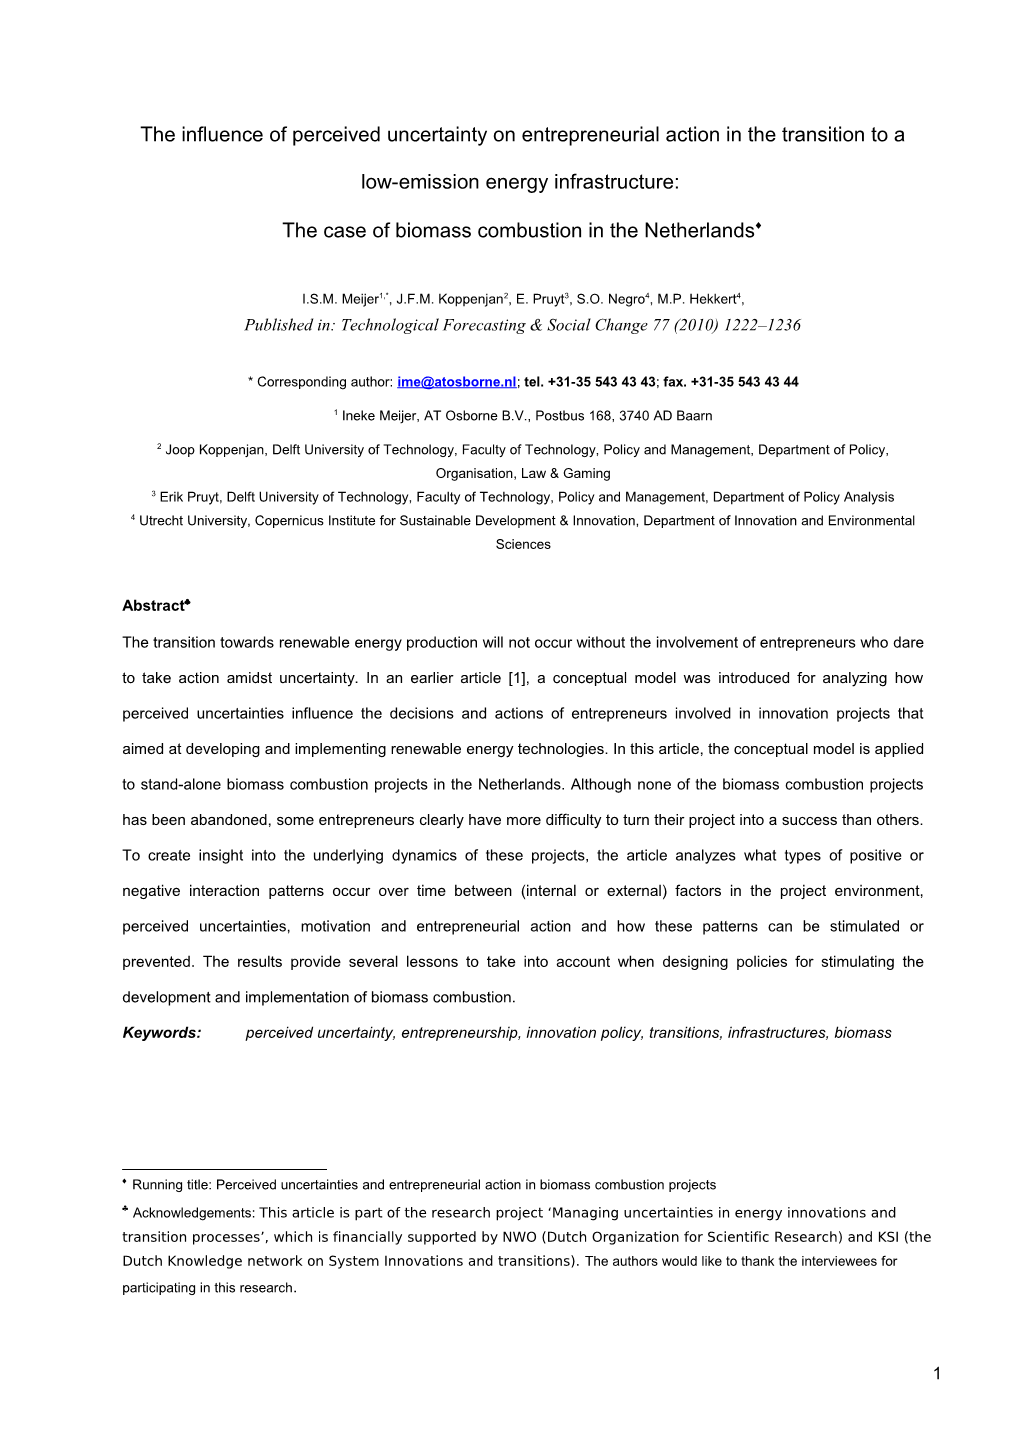 The Influence of Perceived Uncertainty on Entrepreneurial Action in the Transition to A